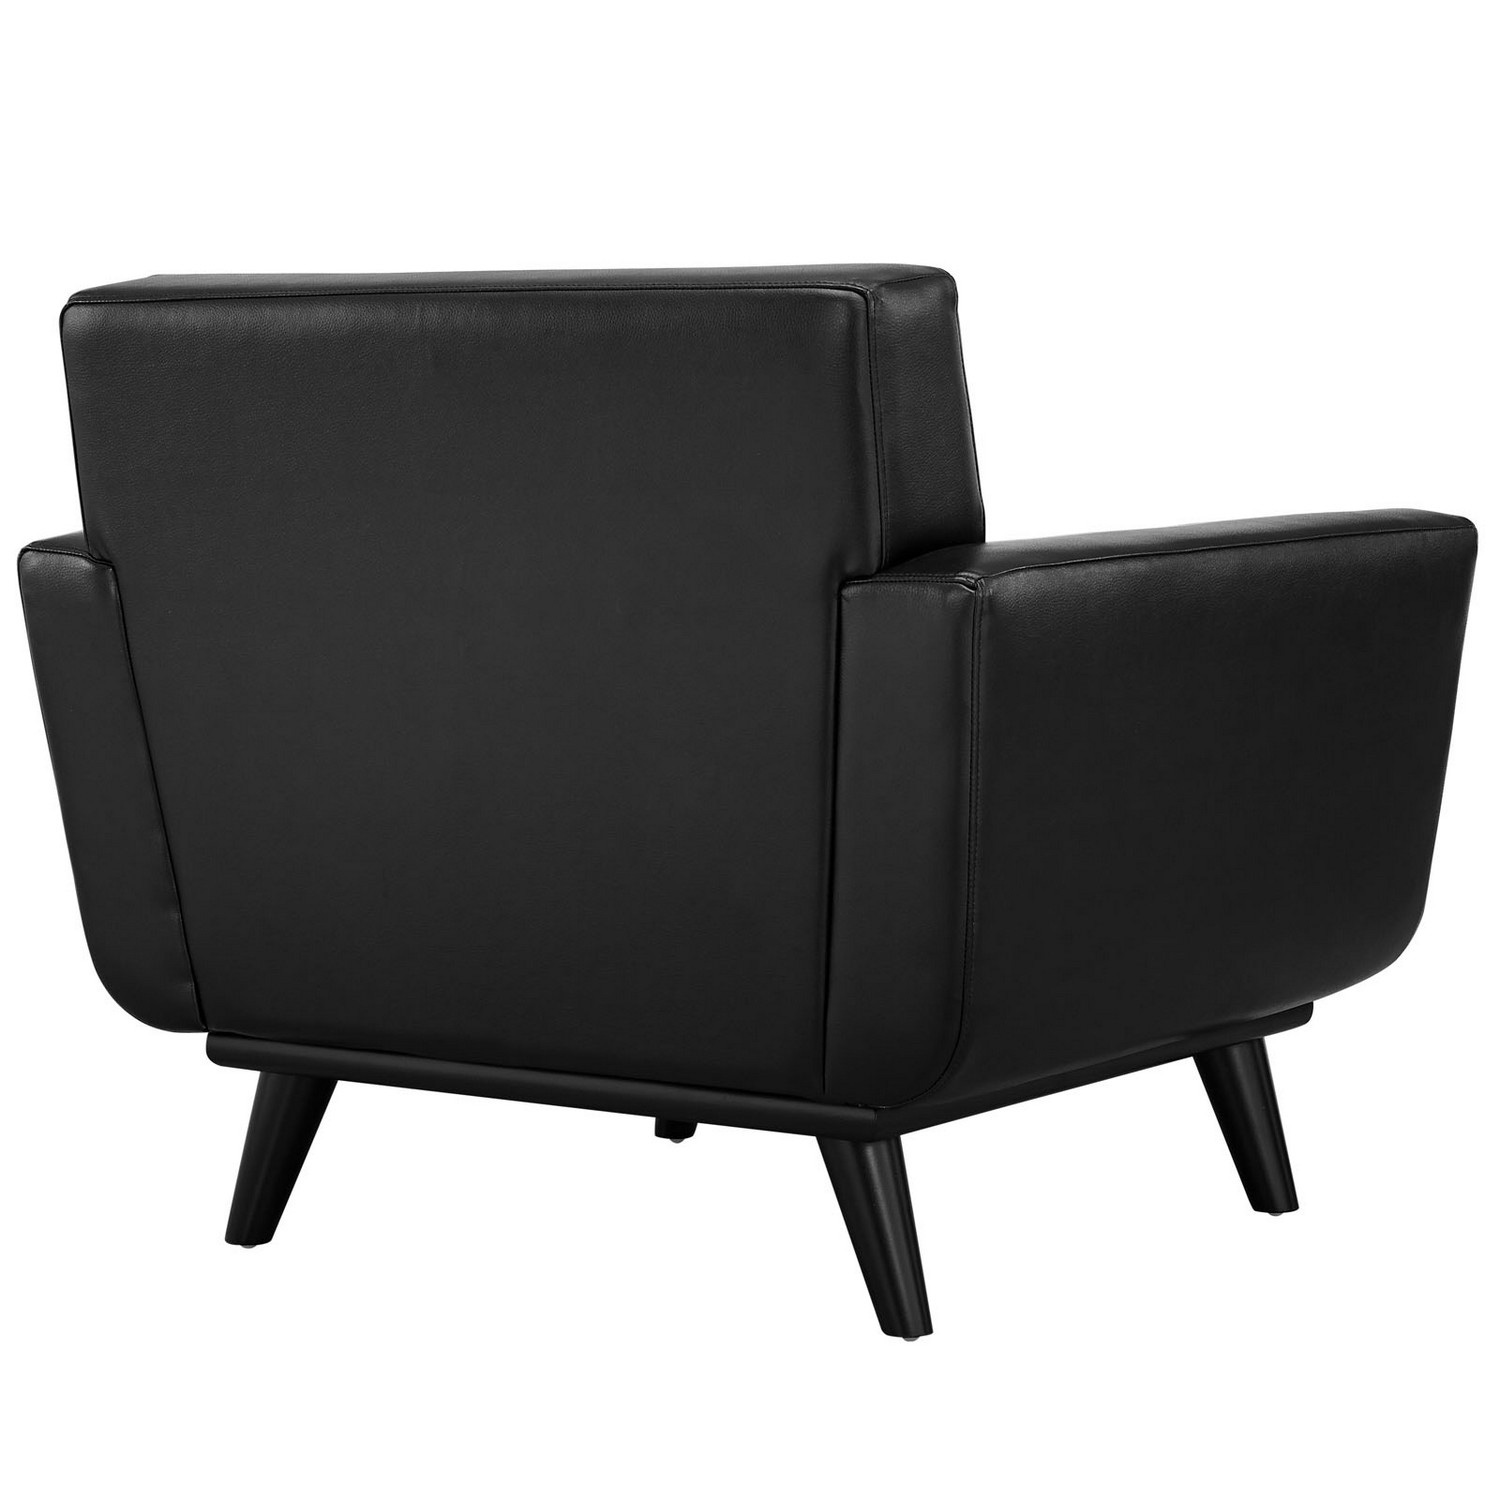 Modway Engage Bonded Leather Armchair - Black